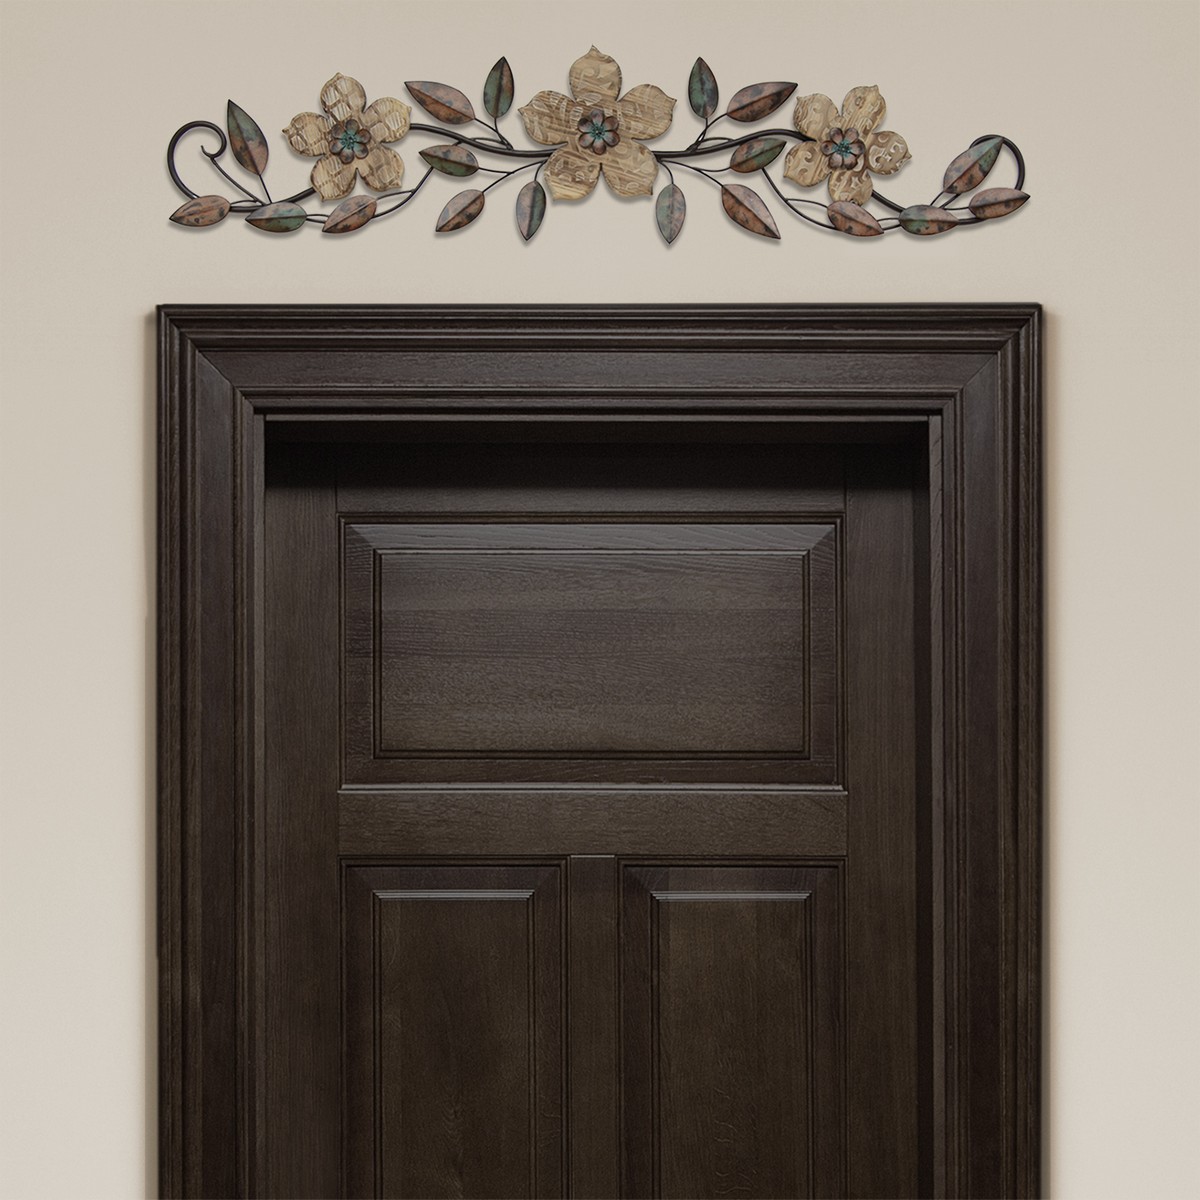 Stratton Home Decor Floral Patterned Wood Over the Door Wall Decor - Multi